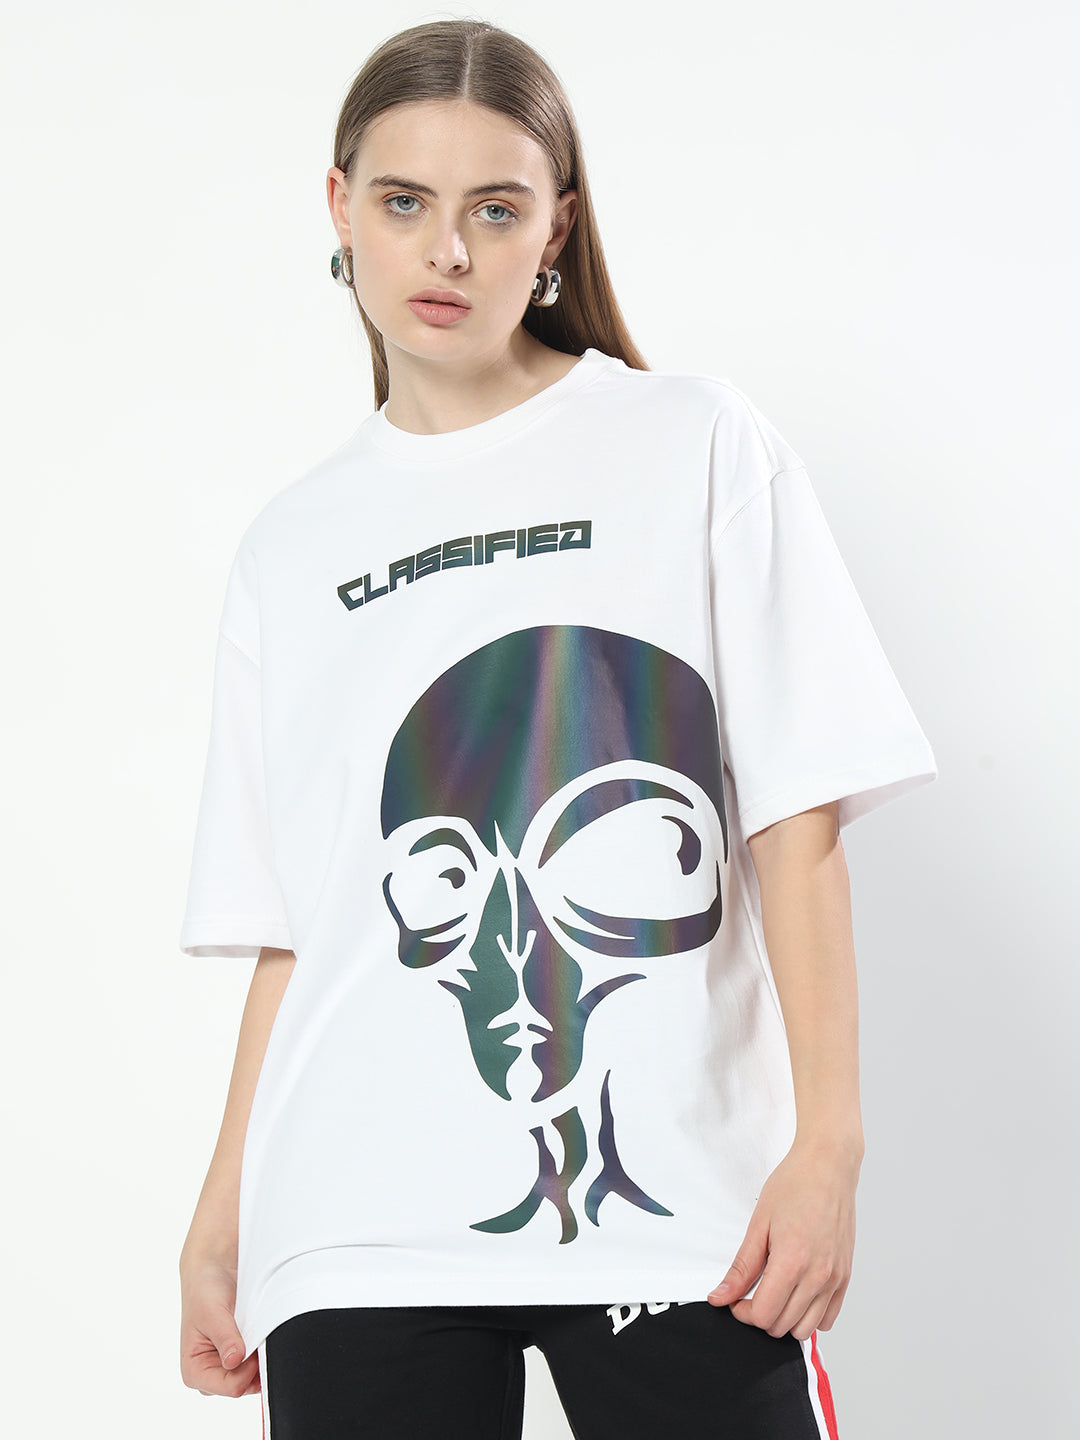 Classified Reflector Over-Sized T-Shirt For Women (White)